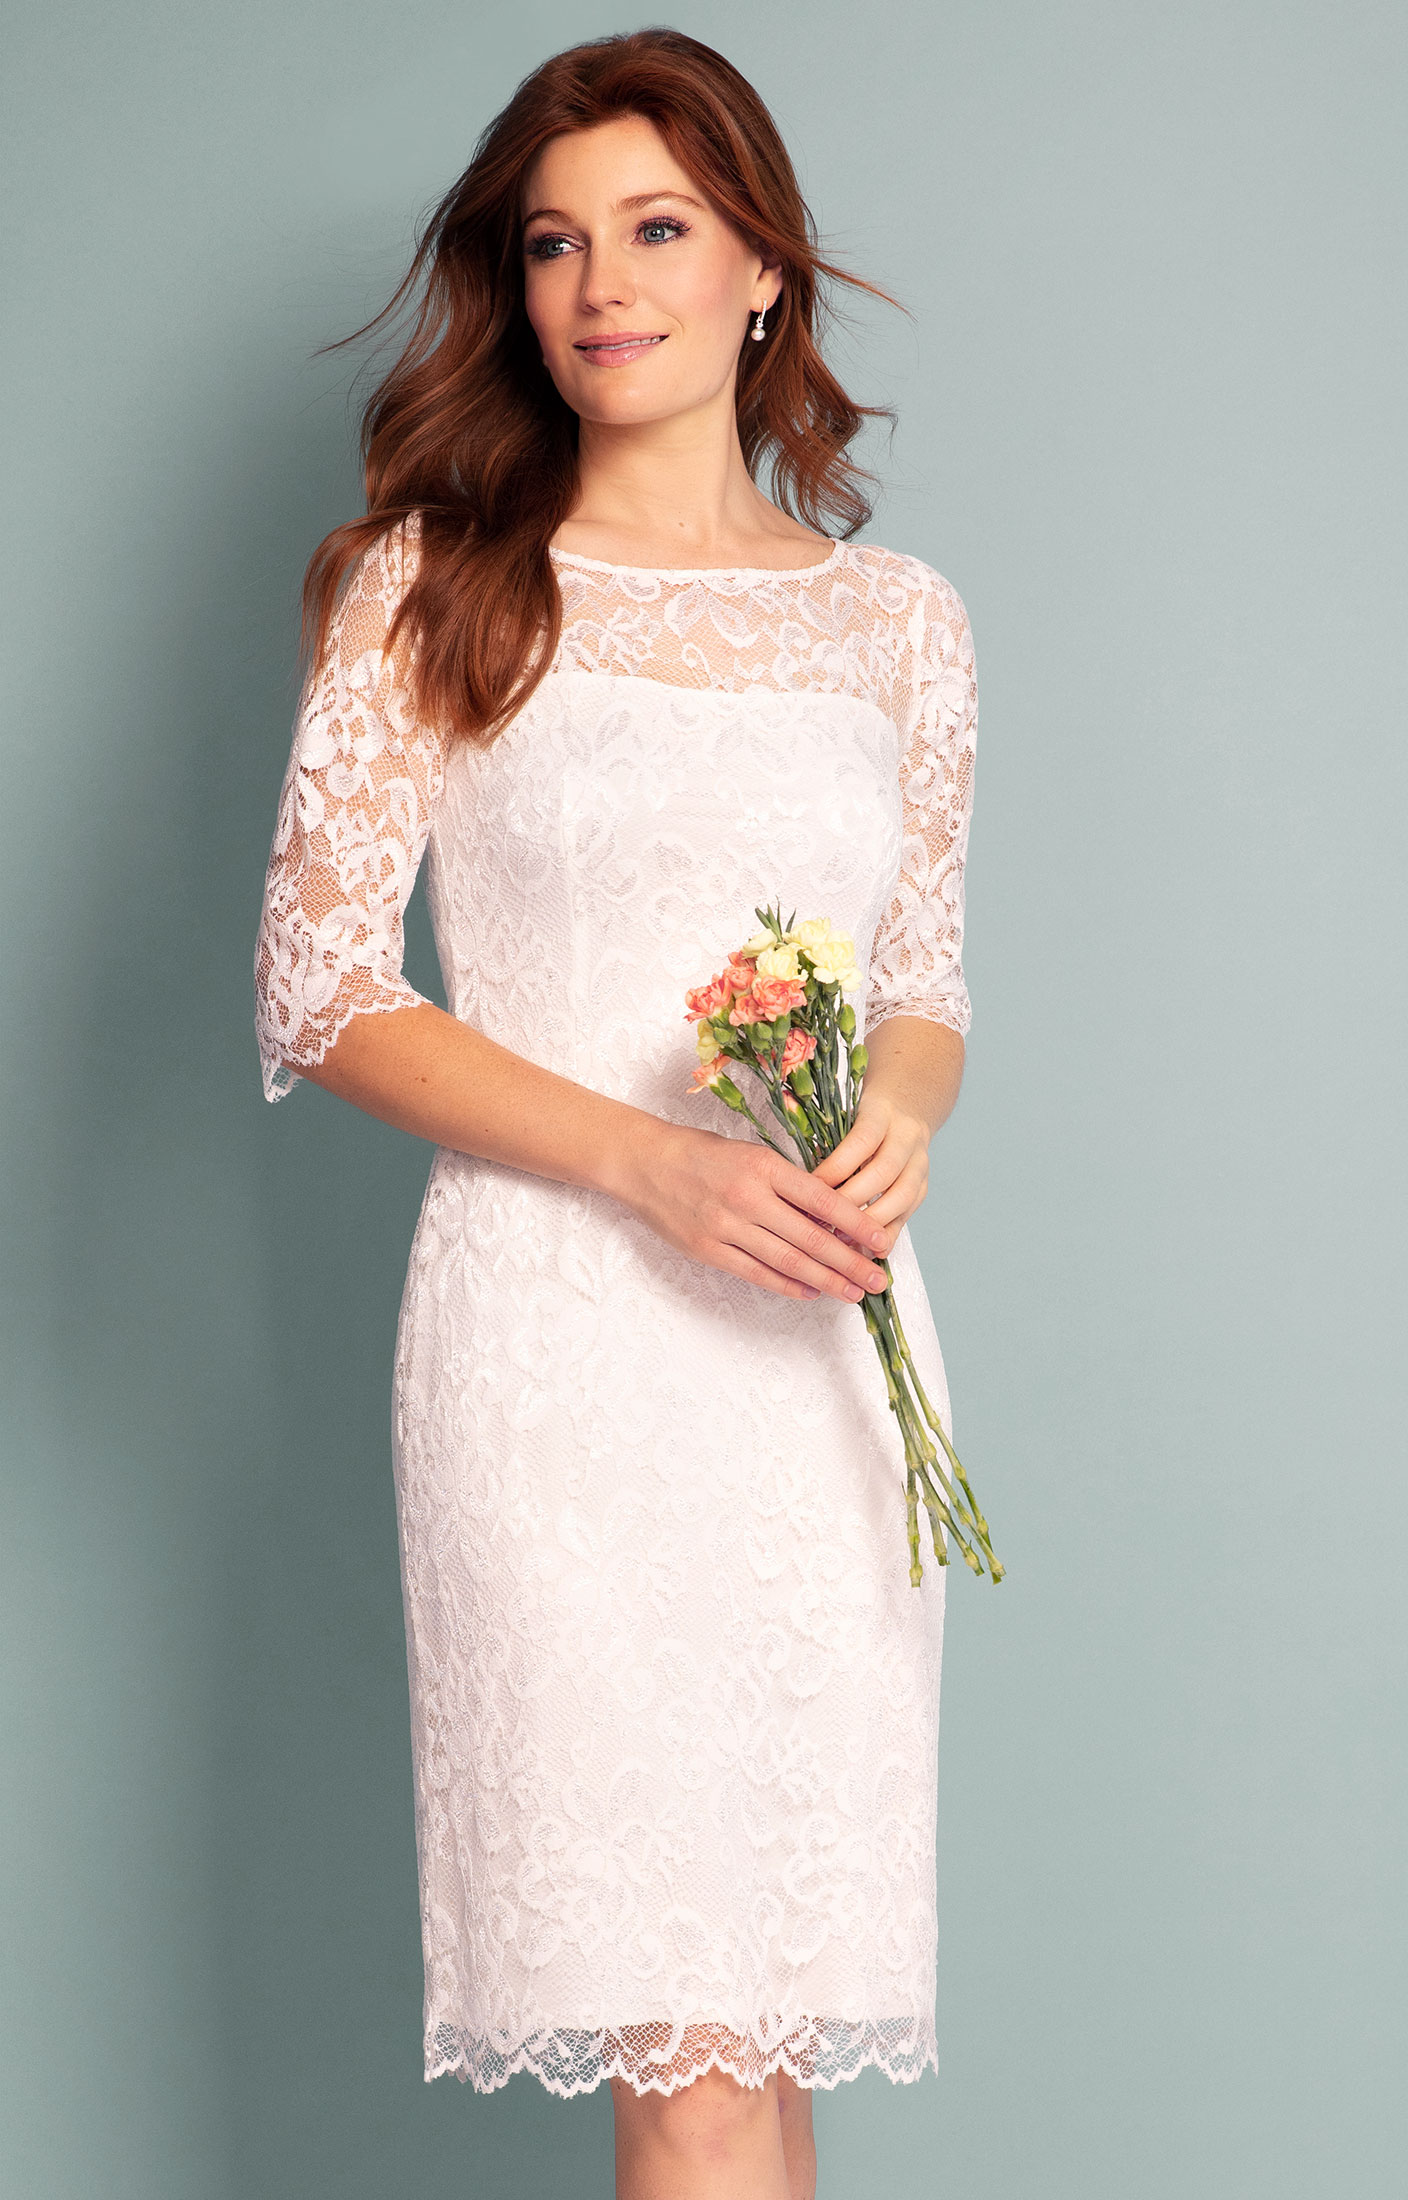 occasion wear for weddings